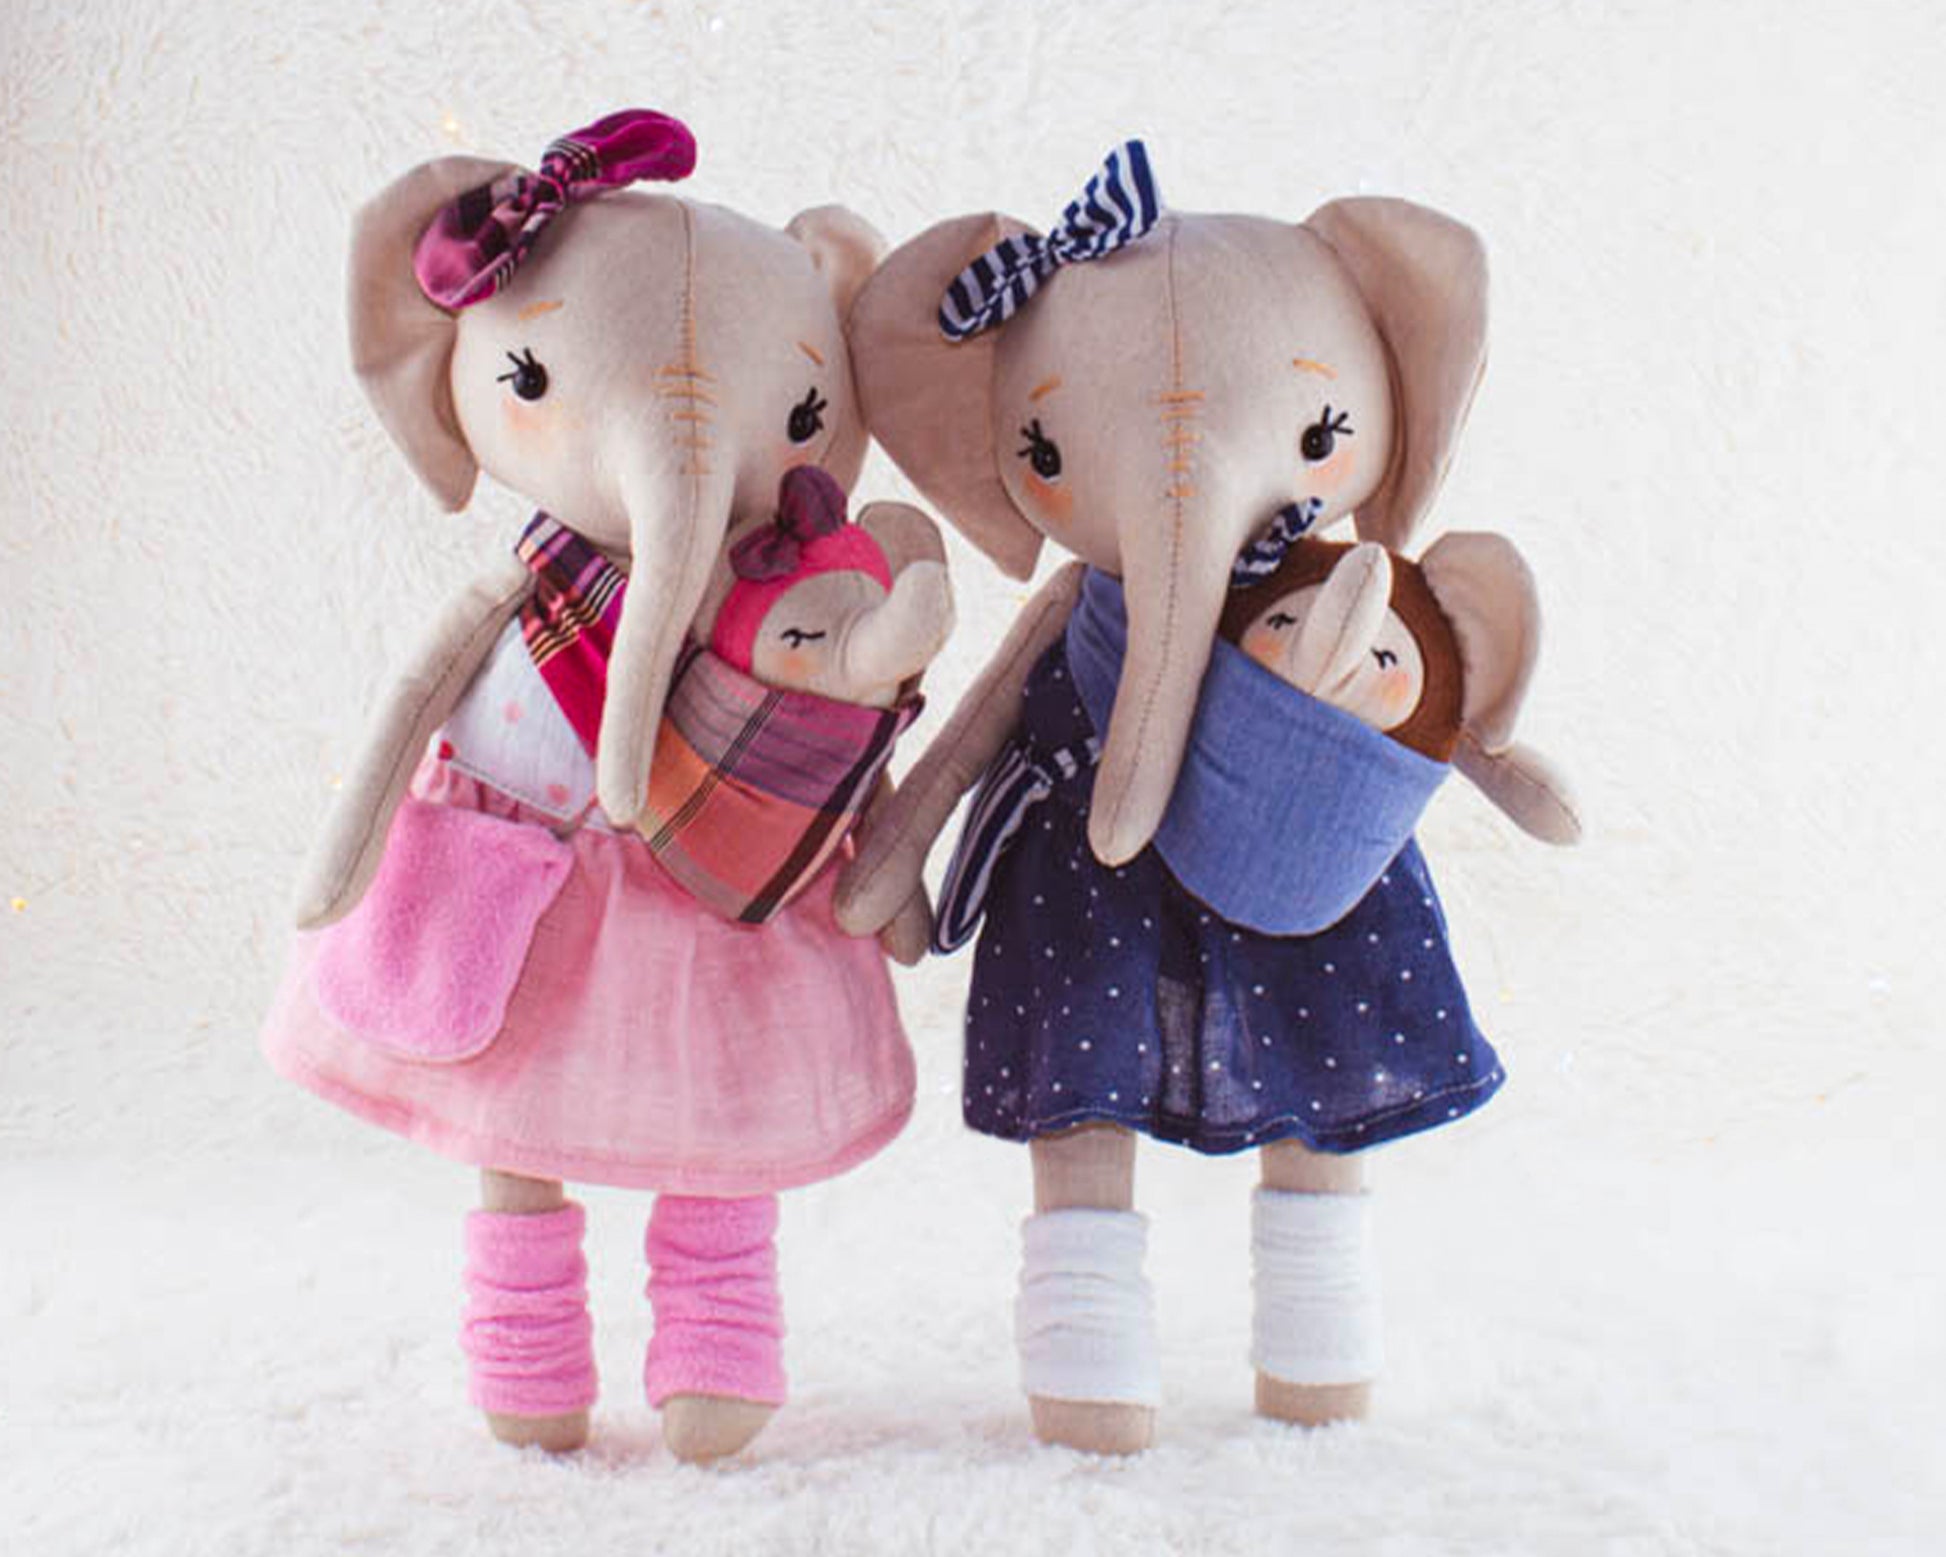 Clothes and accessories from Elephant, Mom and Baby collections - sewing pattern and tutorial